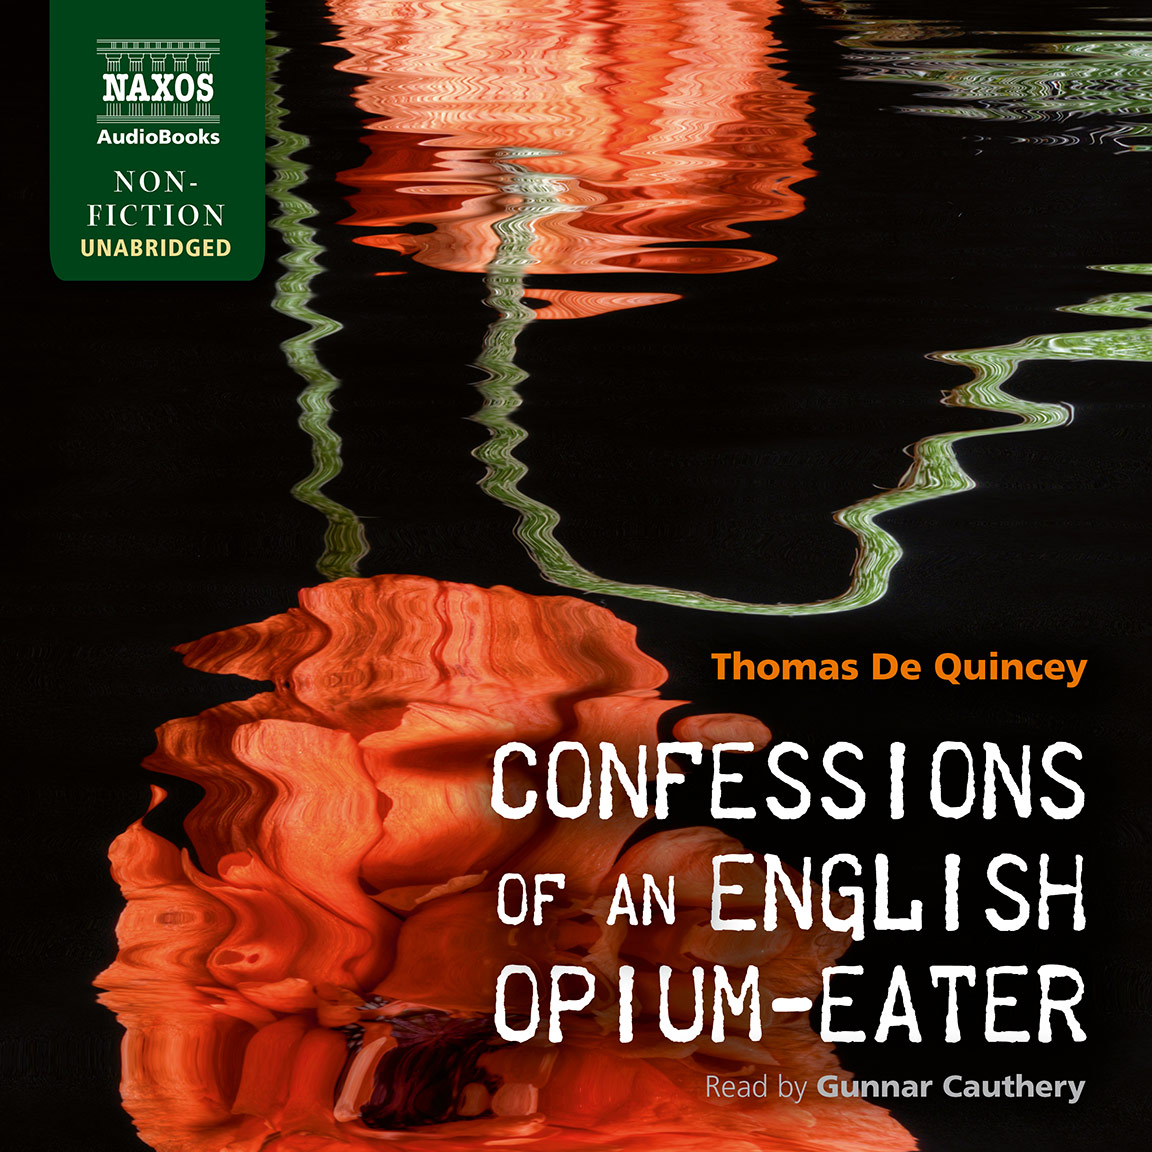 Confessions of an English Opium-Eater (unabridged)